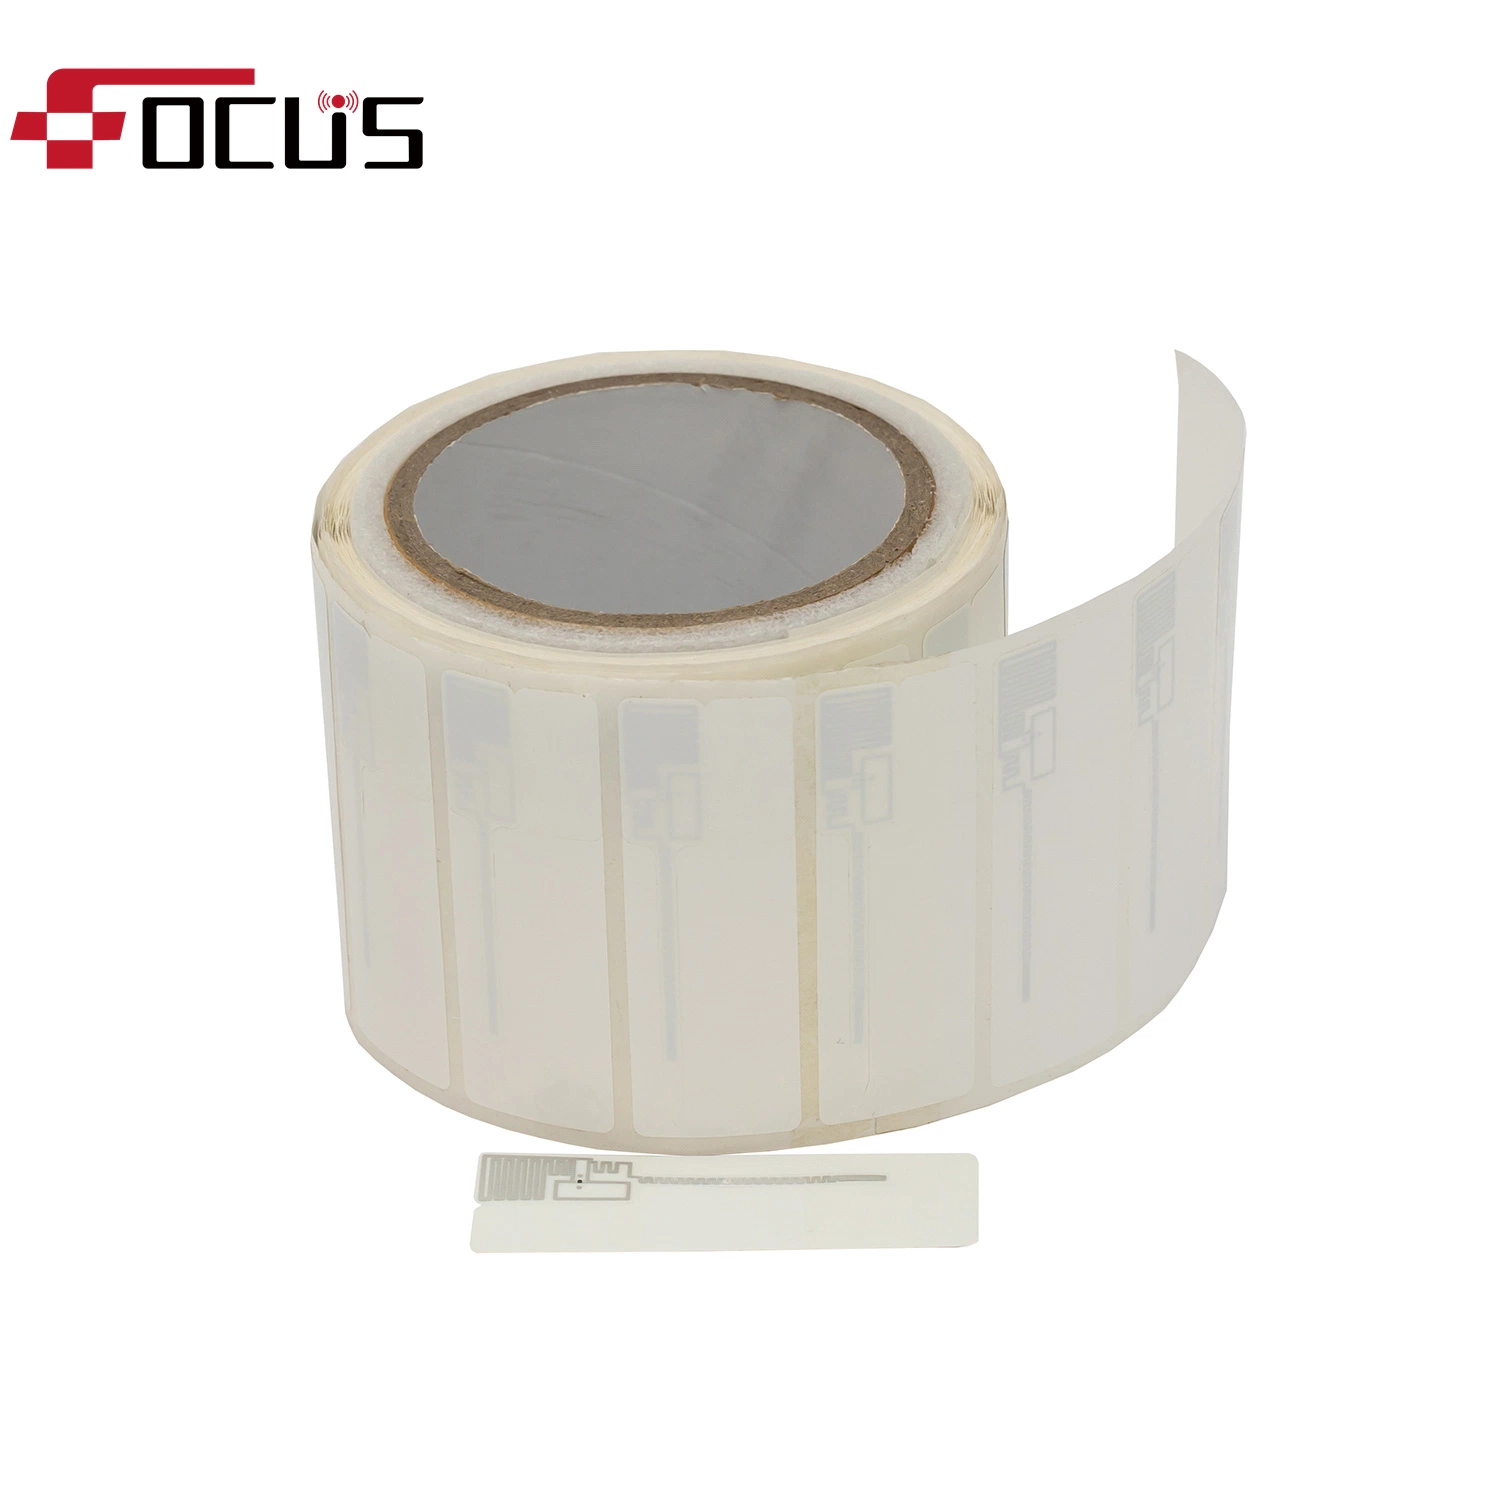 High quality/High cost performance  UHF RFID Label 860-960MHz RFID Sticker Label Tags